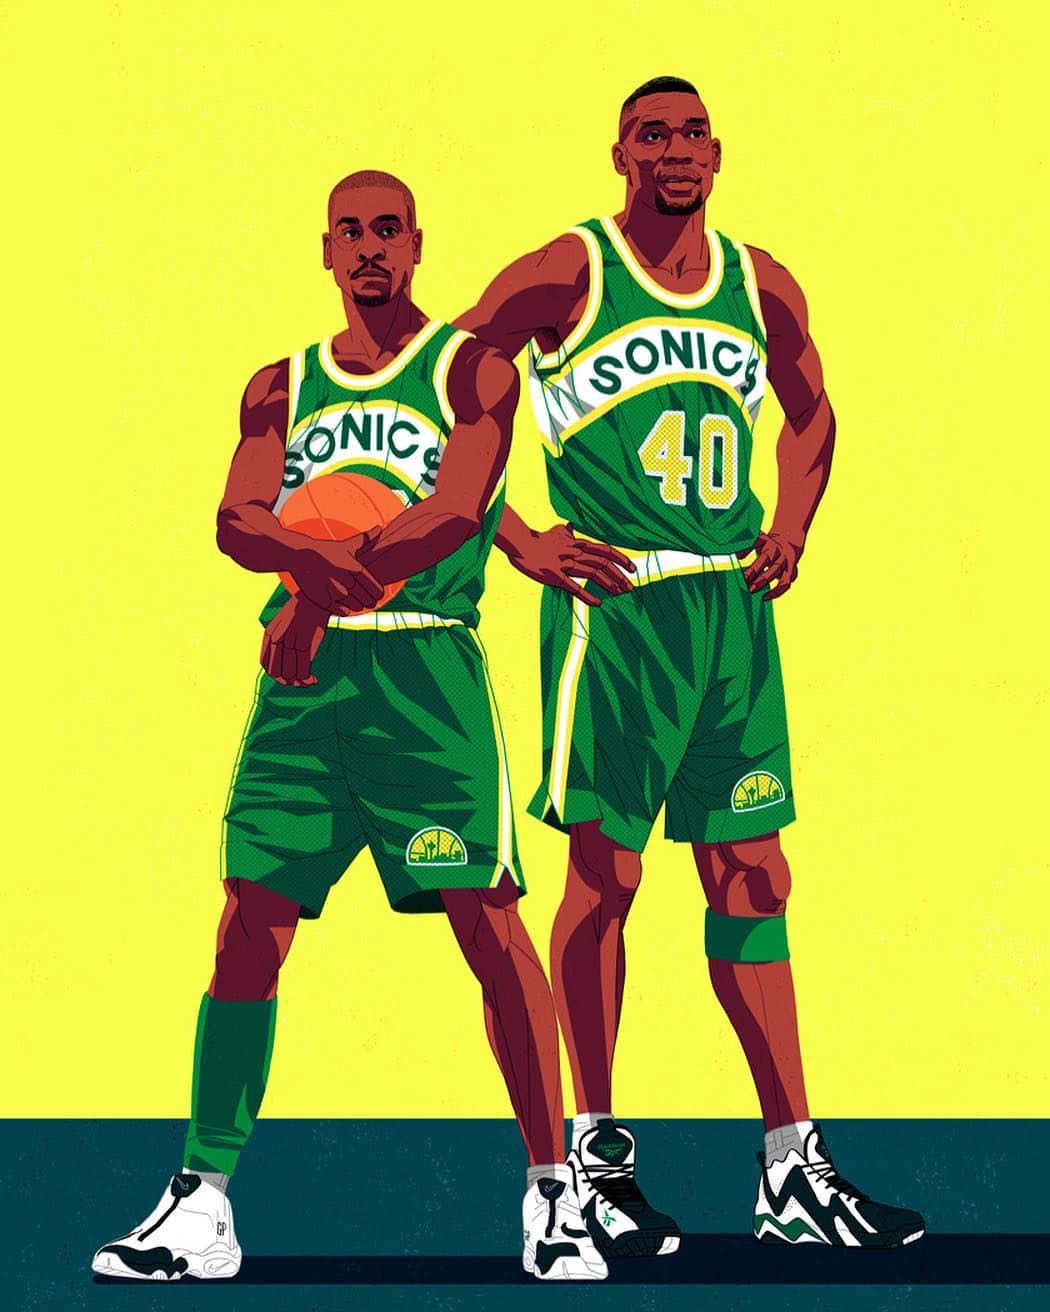 Shawnkemp Is A Former Professional Basketball Player Known For His Impressive Athleticism And Dunking Ability. Fondo de pantalla